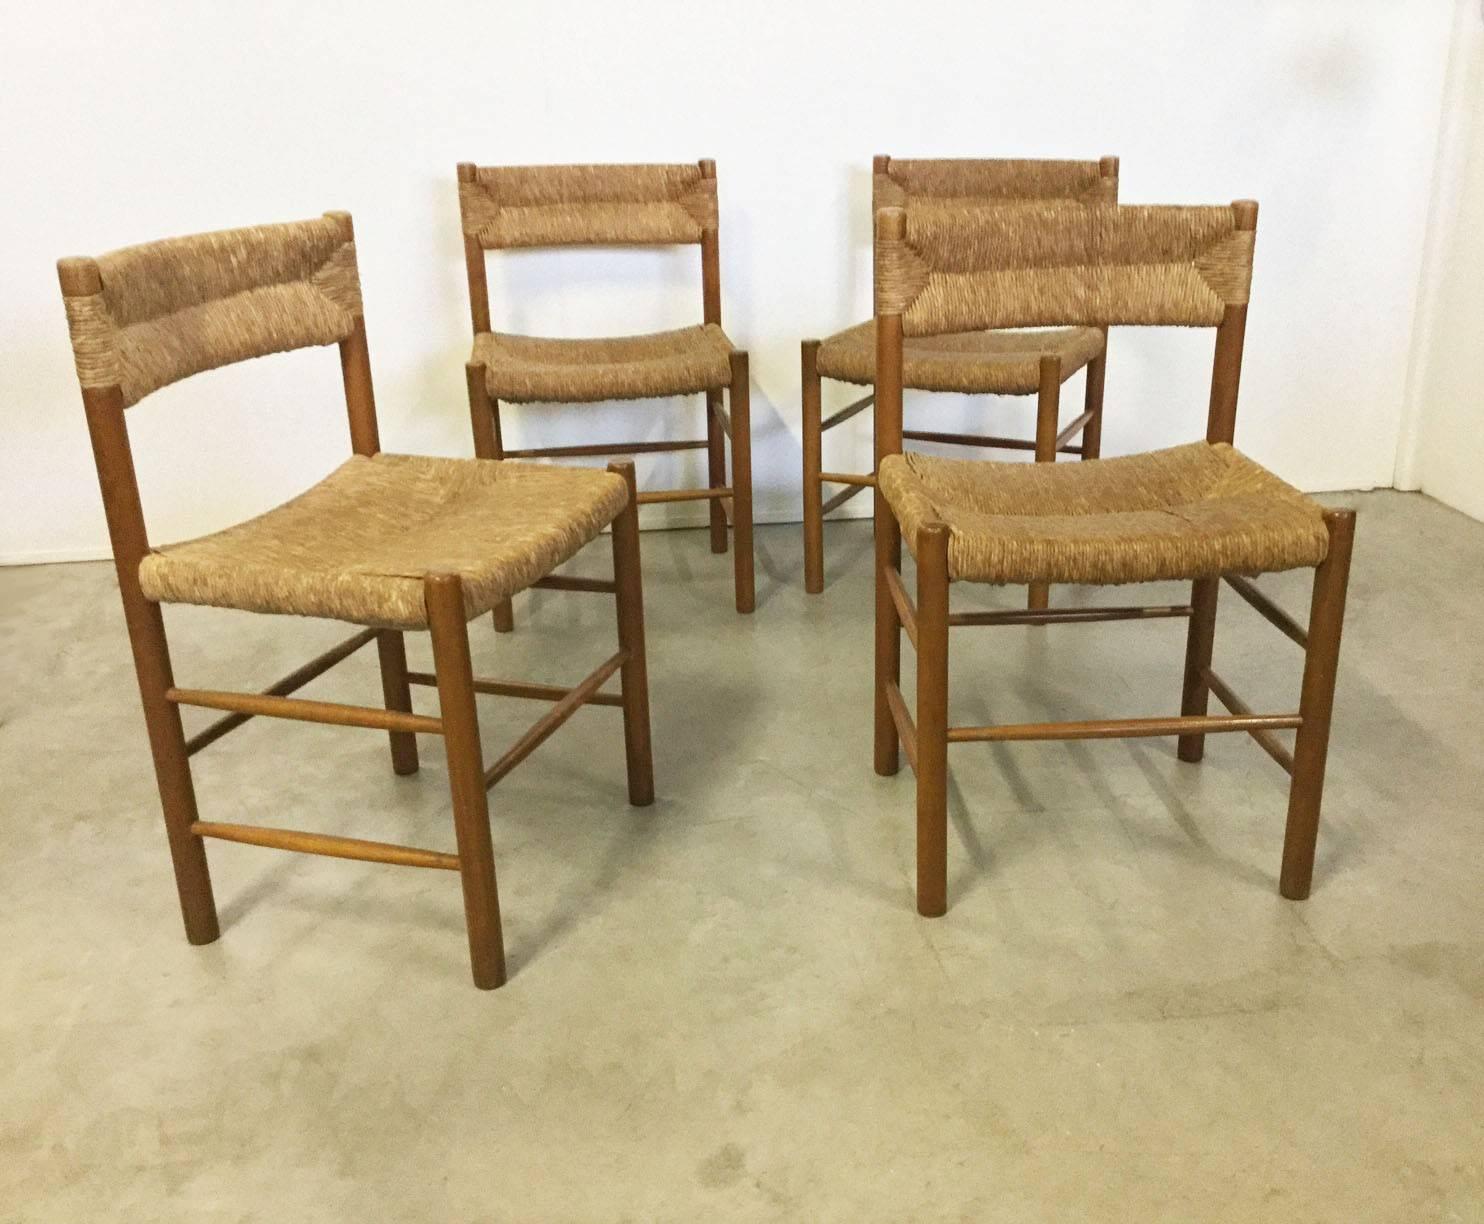 Hand-Crafted Set of Four Chairs by Robert Sentou For Sale